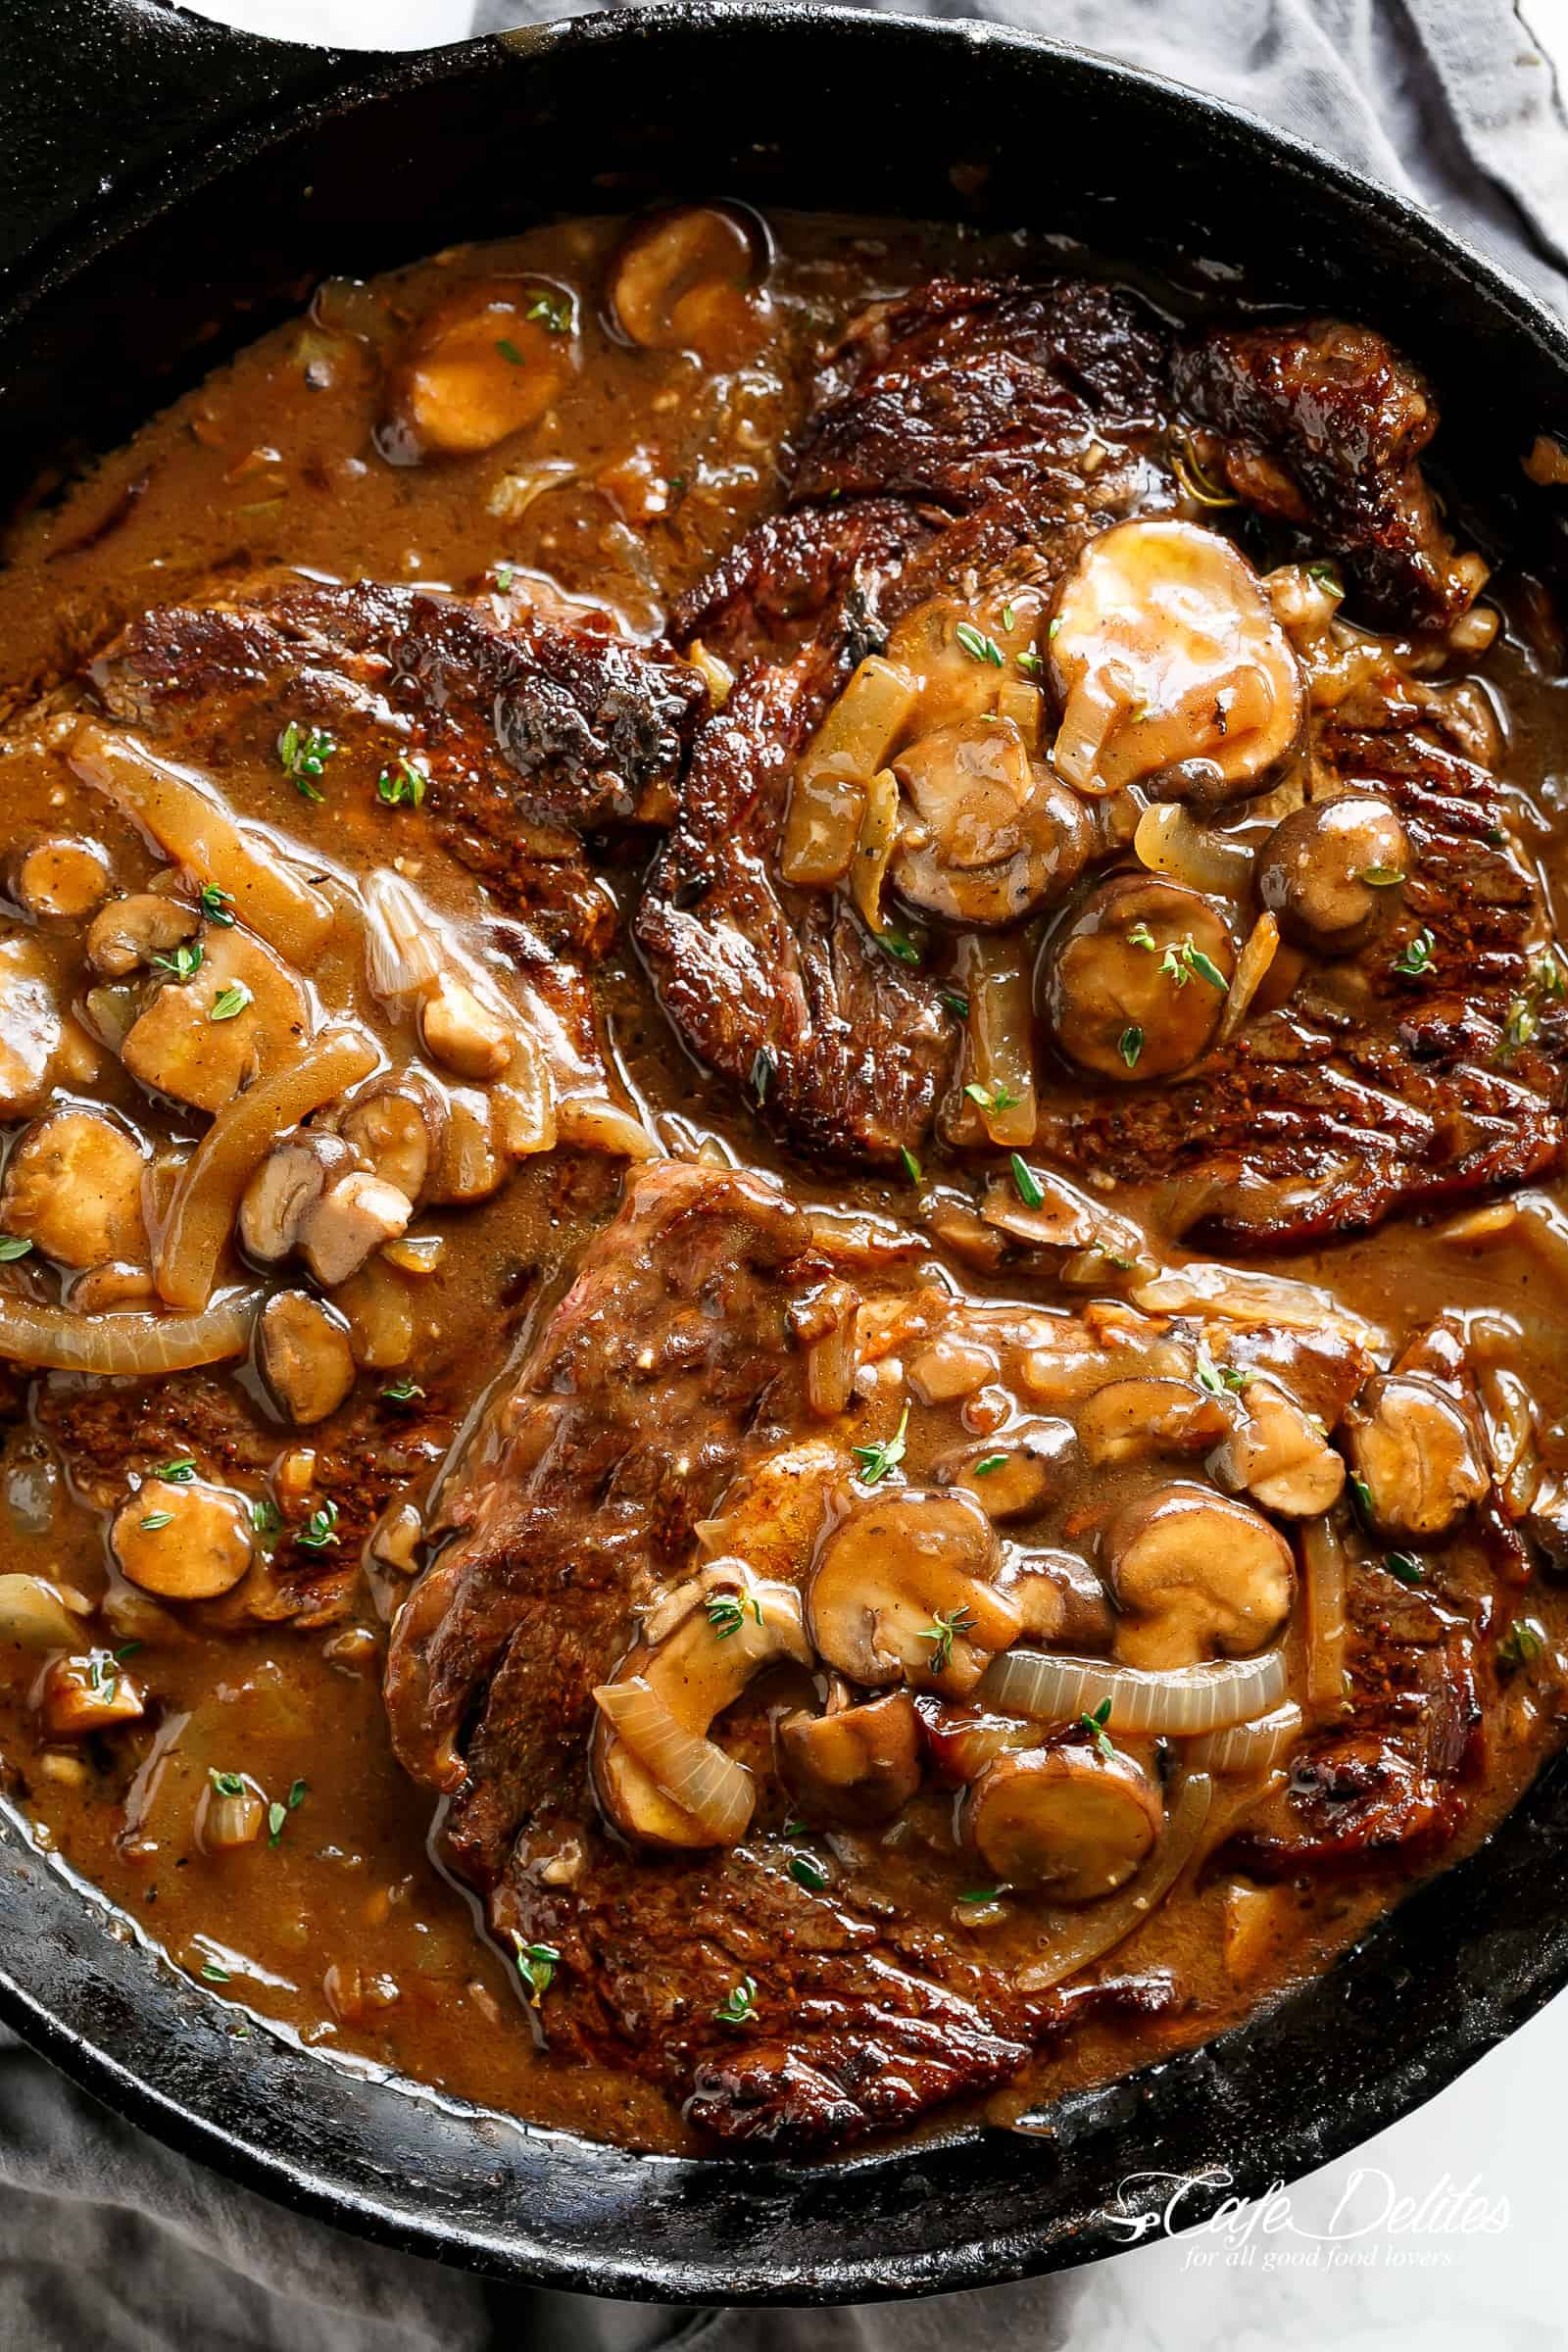 Ribeye Steaks With Mushroom Gravy is simple and delicious with a quick and easy homemade gravy made from scratch in 5 minutes! | cafedelites.com